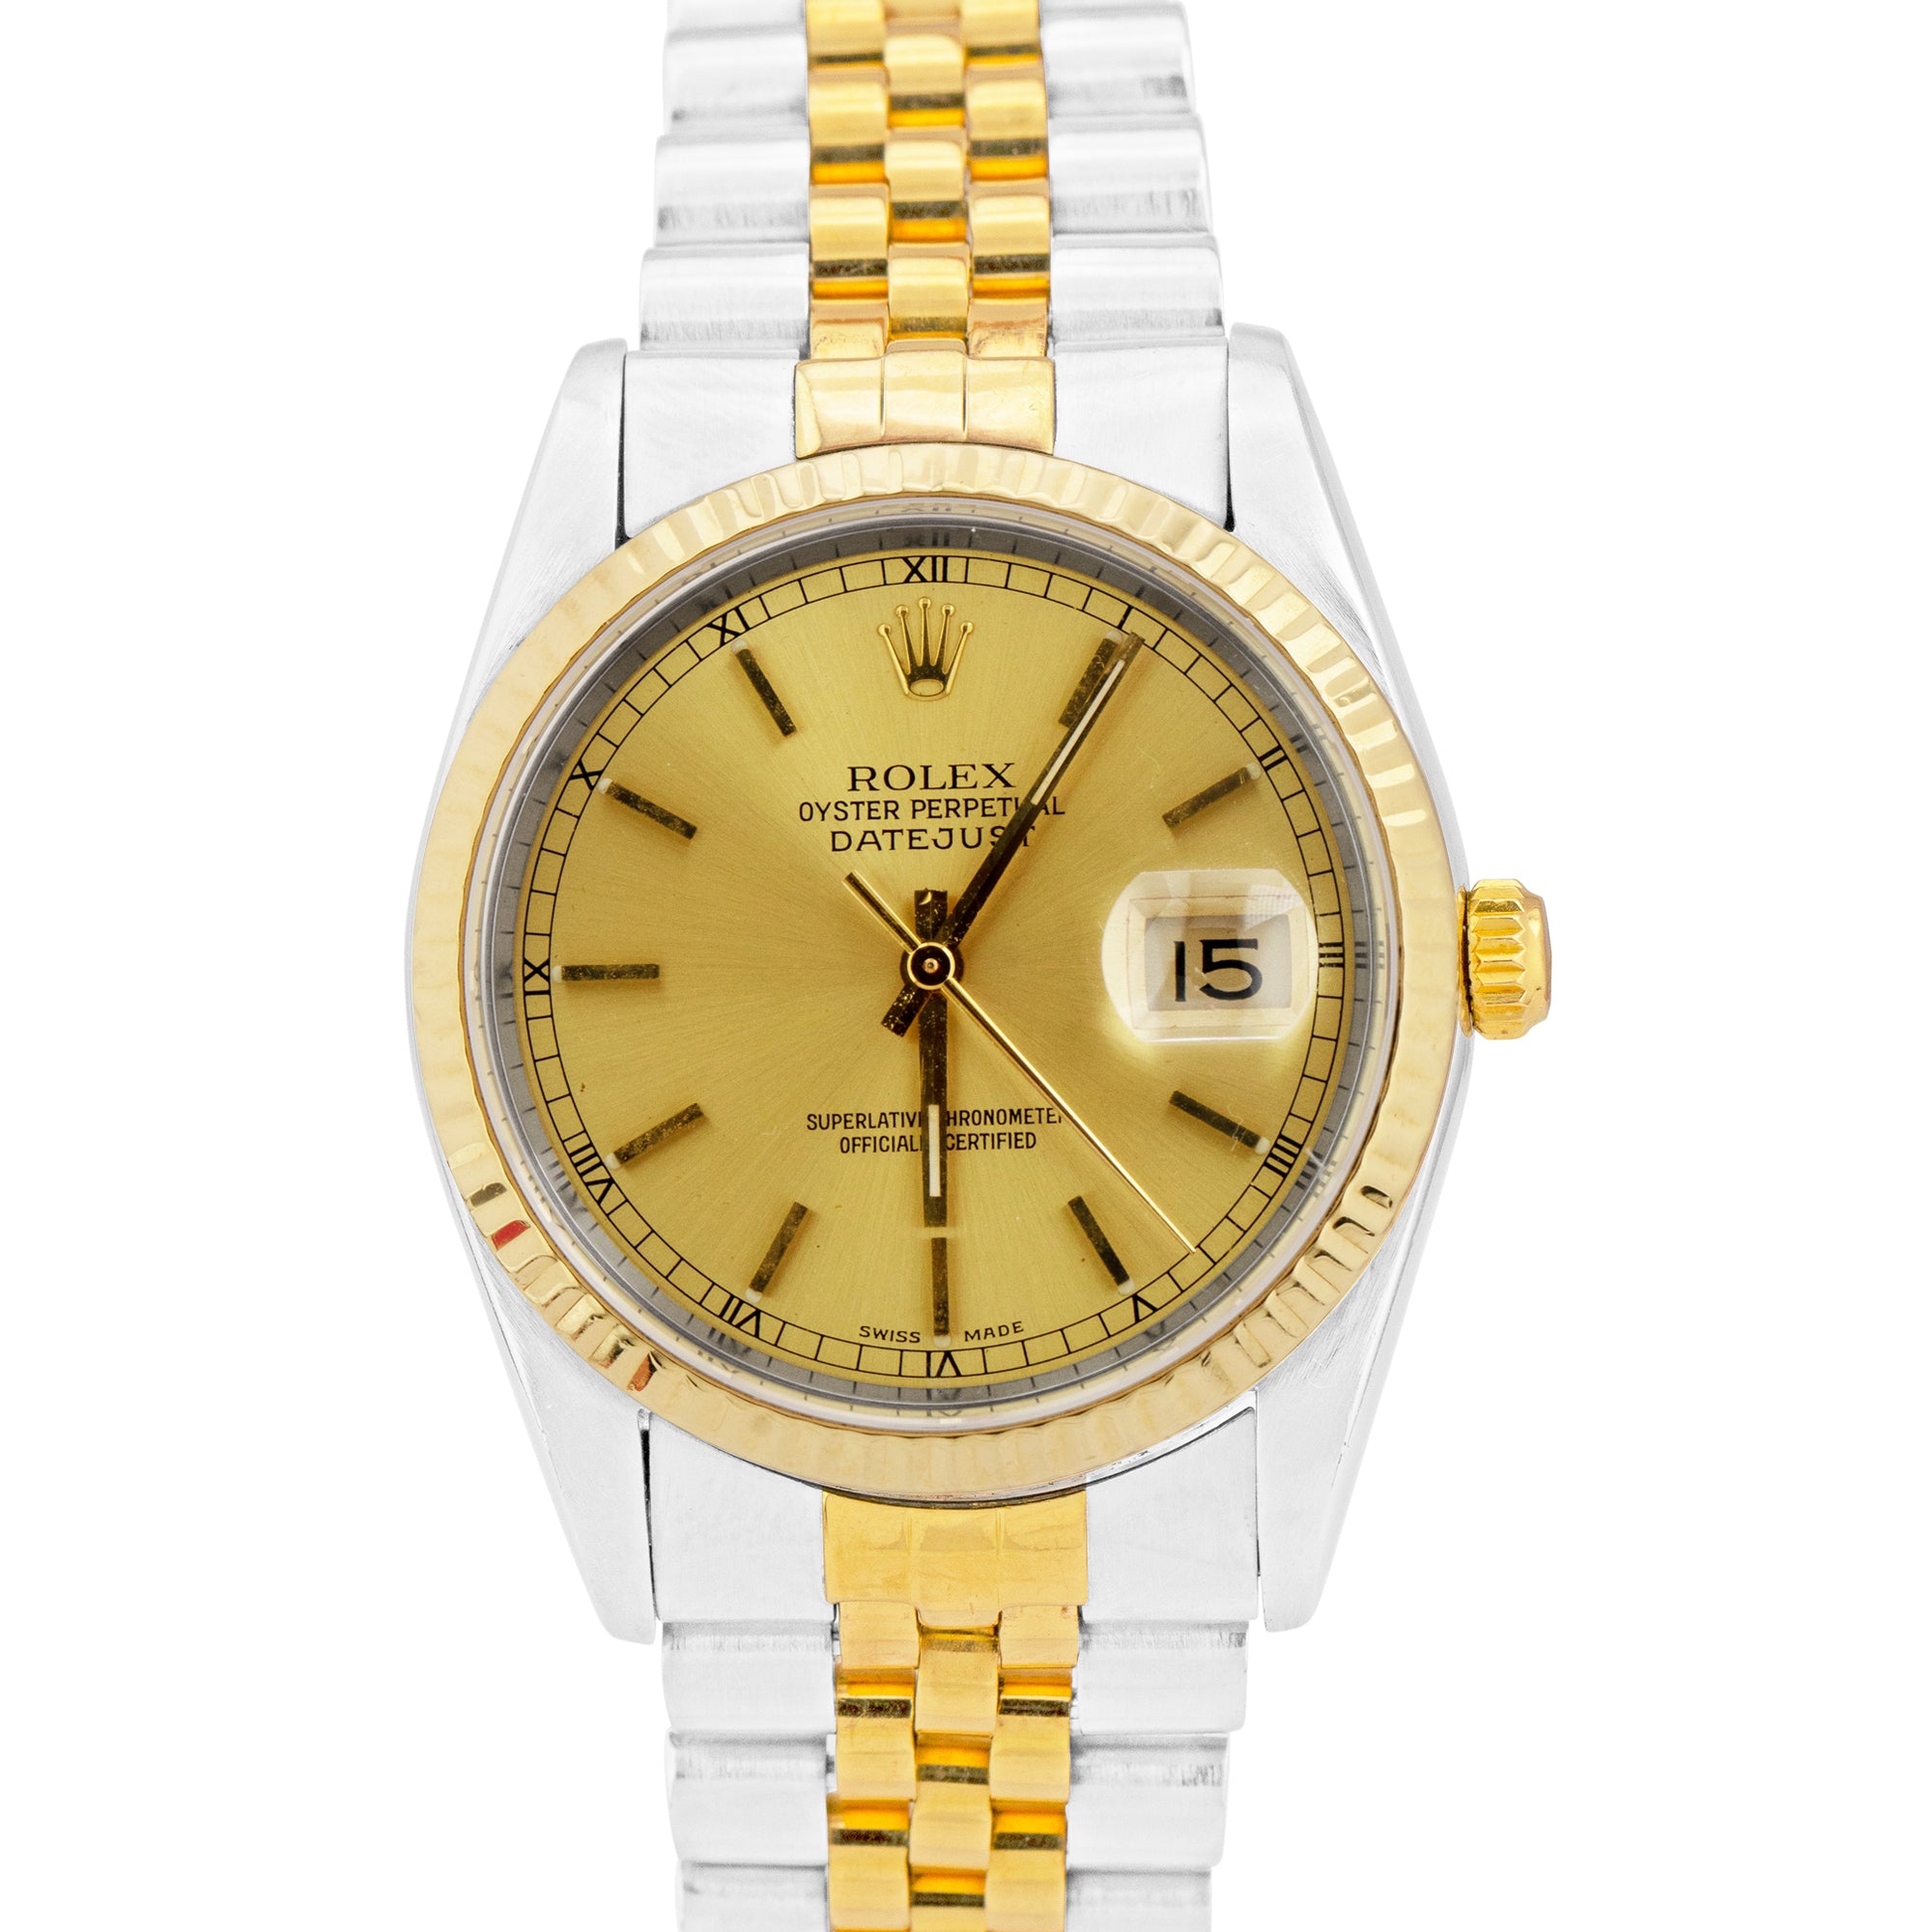 Rolex DateJust 36mm 18K Yellow Gold Stainless Champagne Jubilee Watch 16233